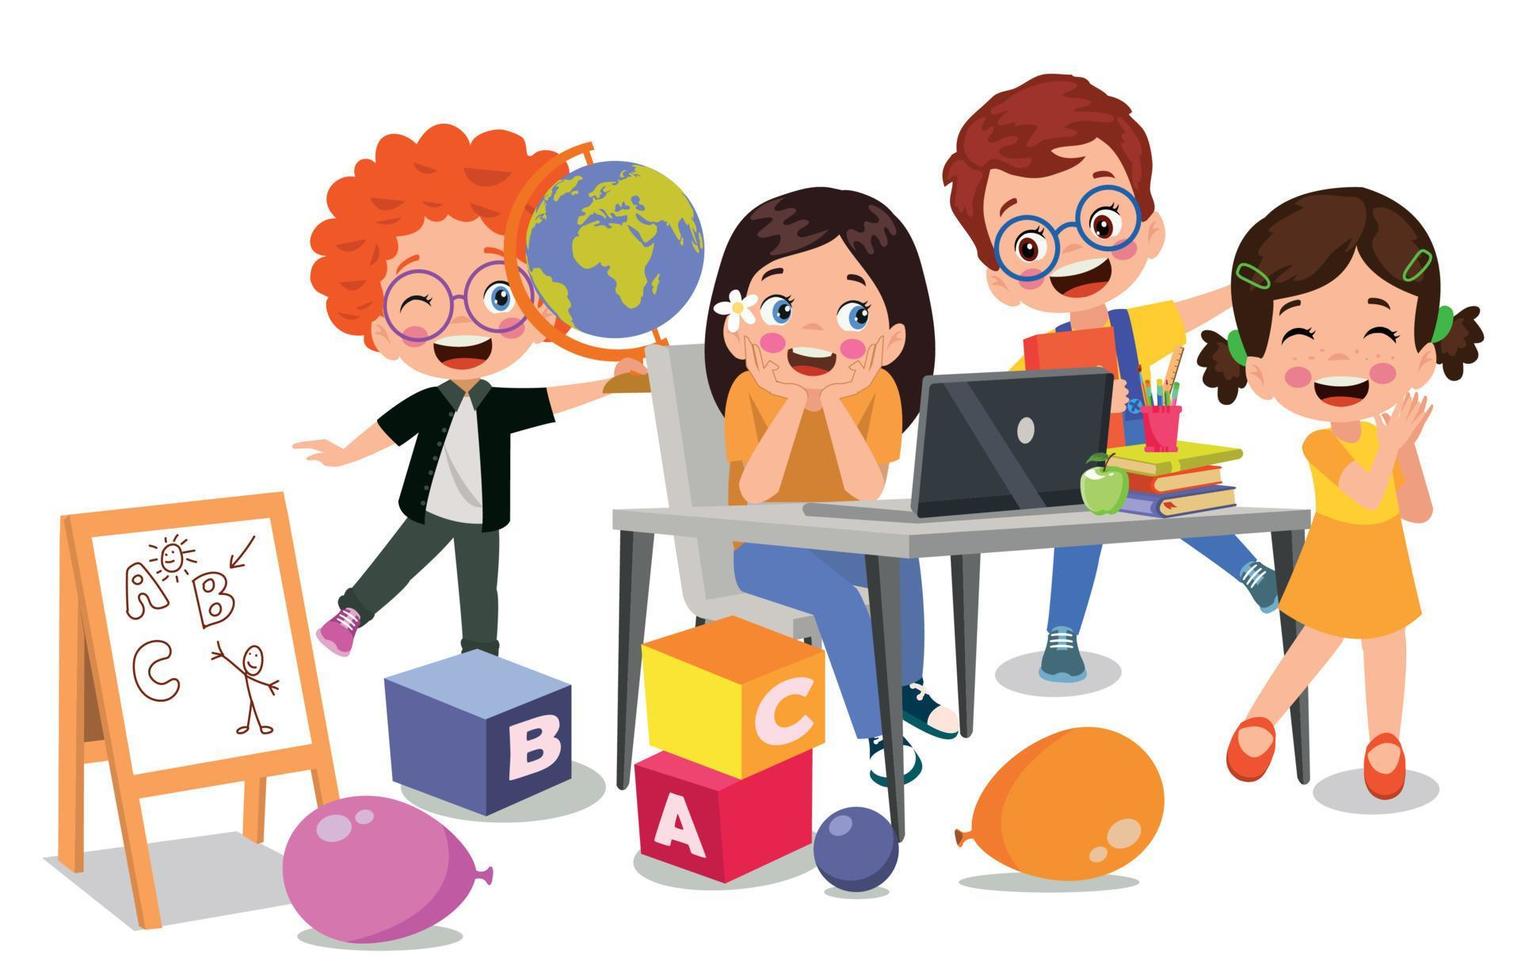 Vector Illustration Of Kids With Computer and with a friend